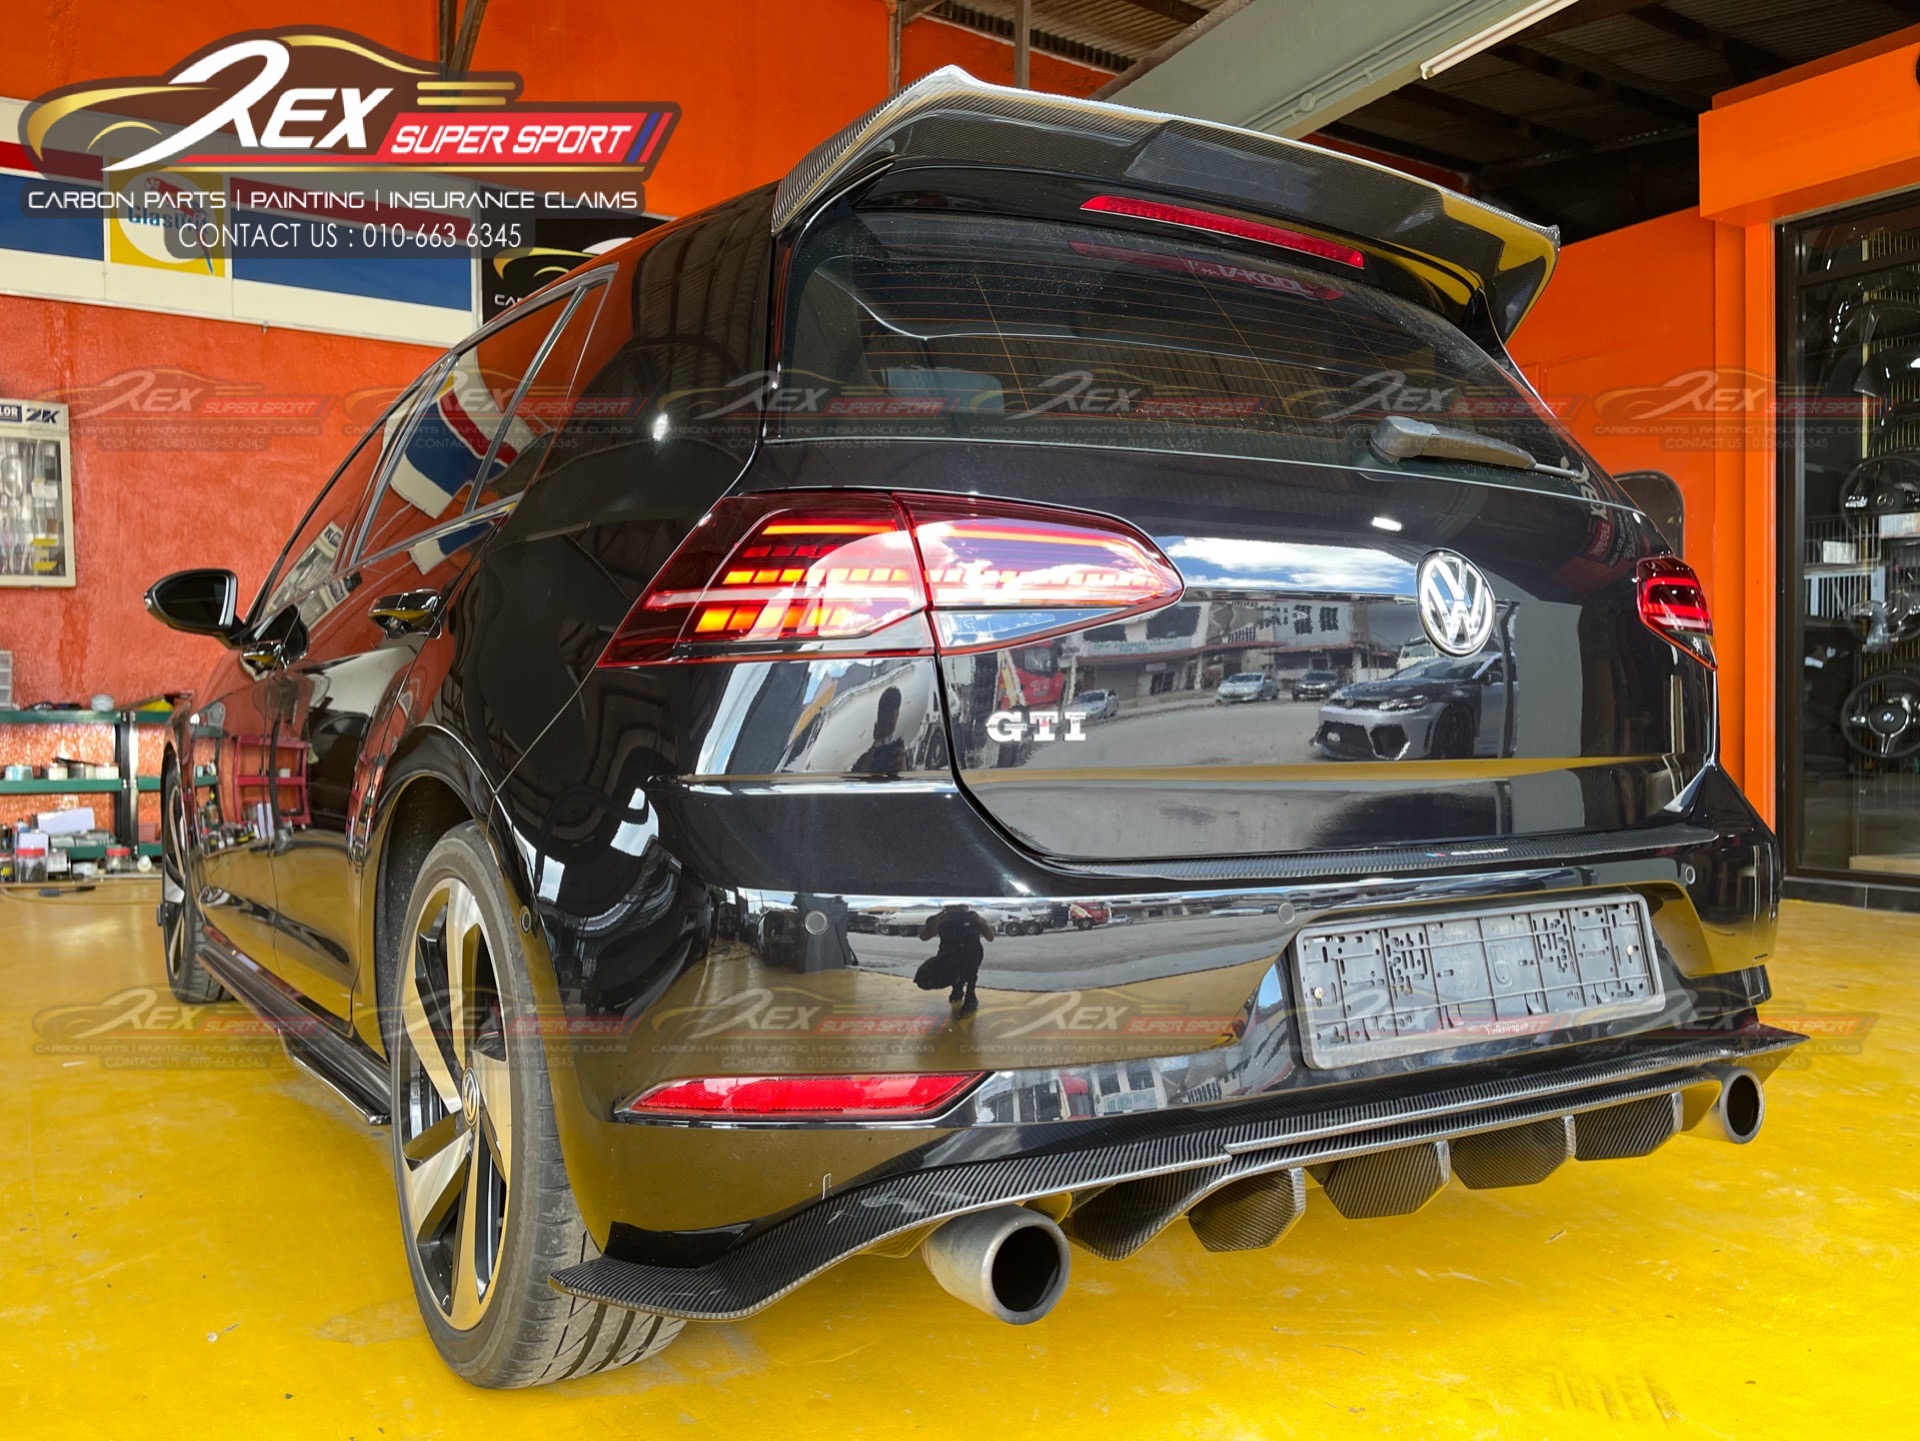 Golf Mk7.5 GTI Rear Diffuser Carbon | Rexsupersport - Specializes In ...